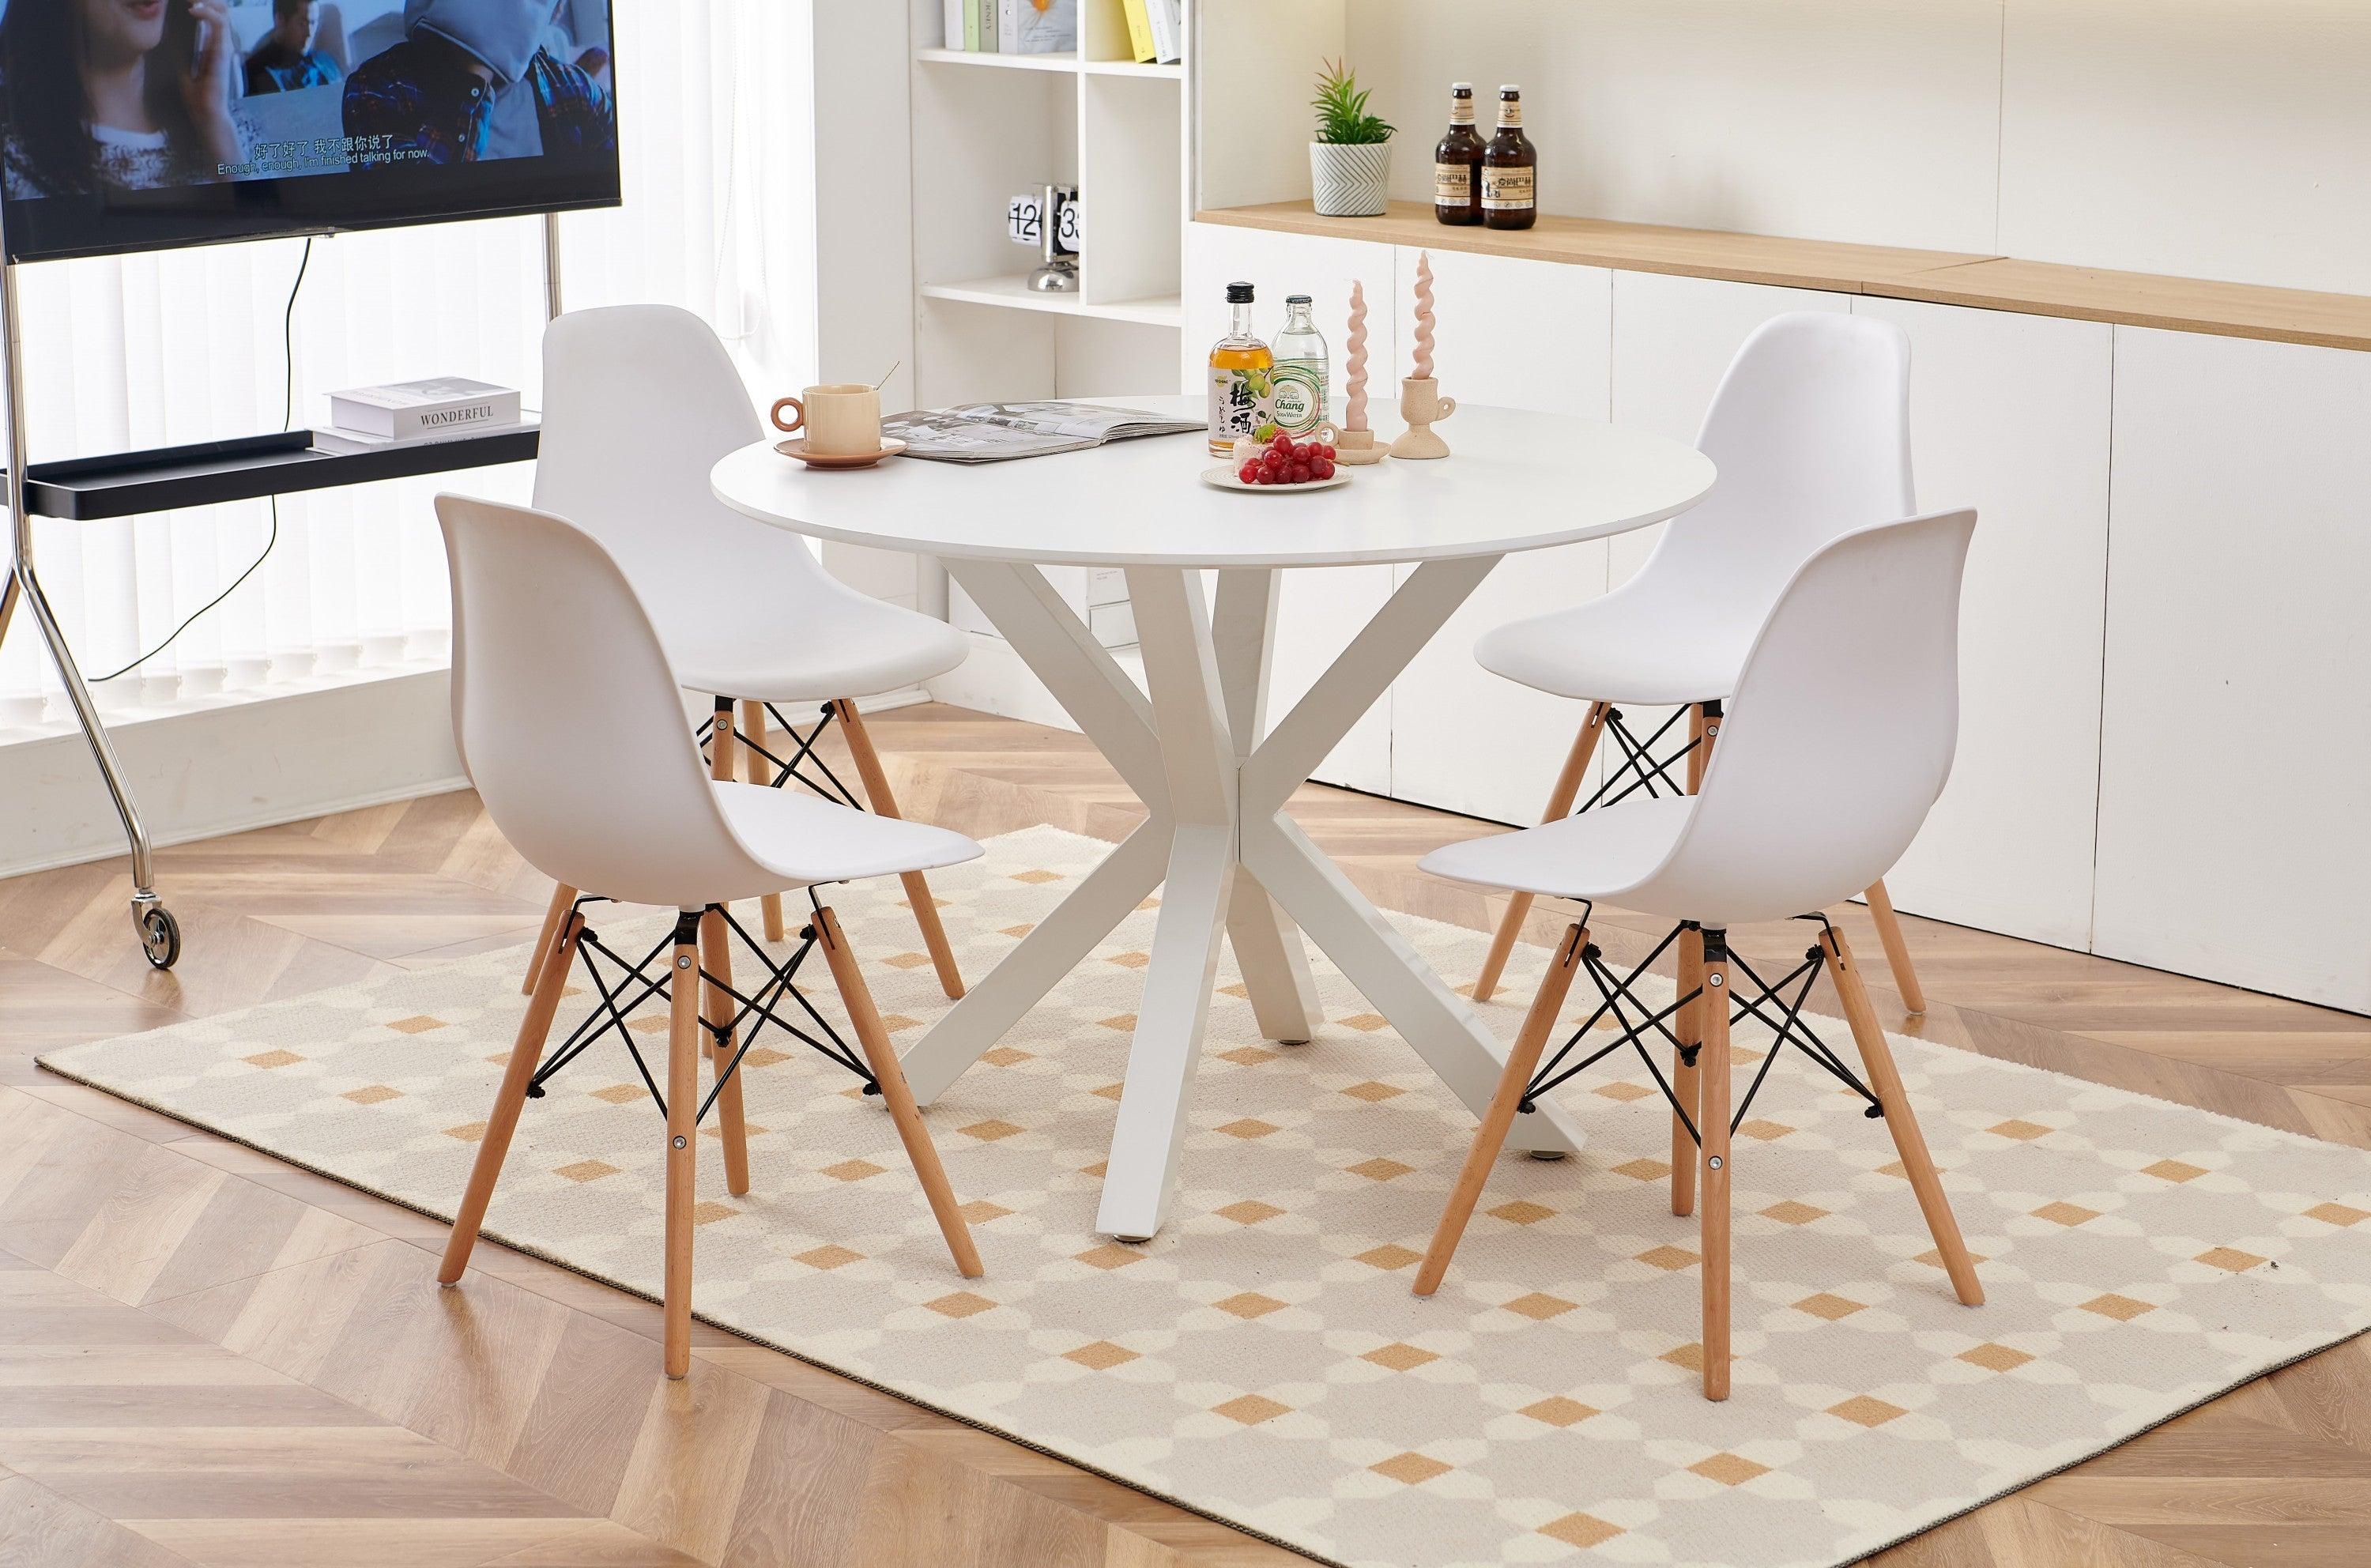 1+4, 5Pieces Dining Set, 42.1" WHITE Table Cross Leg Mid-Century Dining Table For 4-6 People With Round Mdf Table Top, Pedestal Dining Table, End Table Leisure Coffee Table